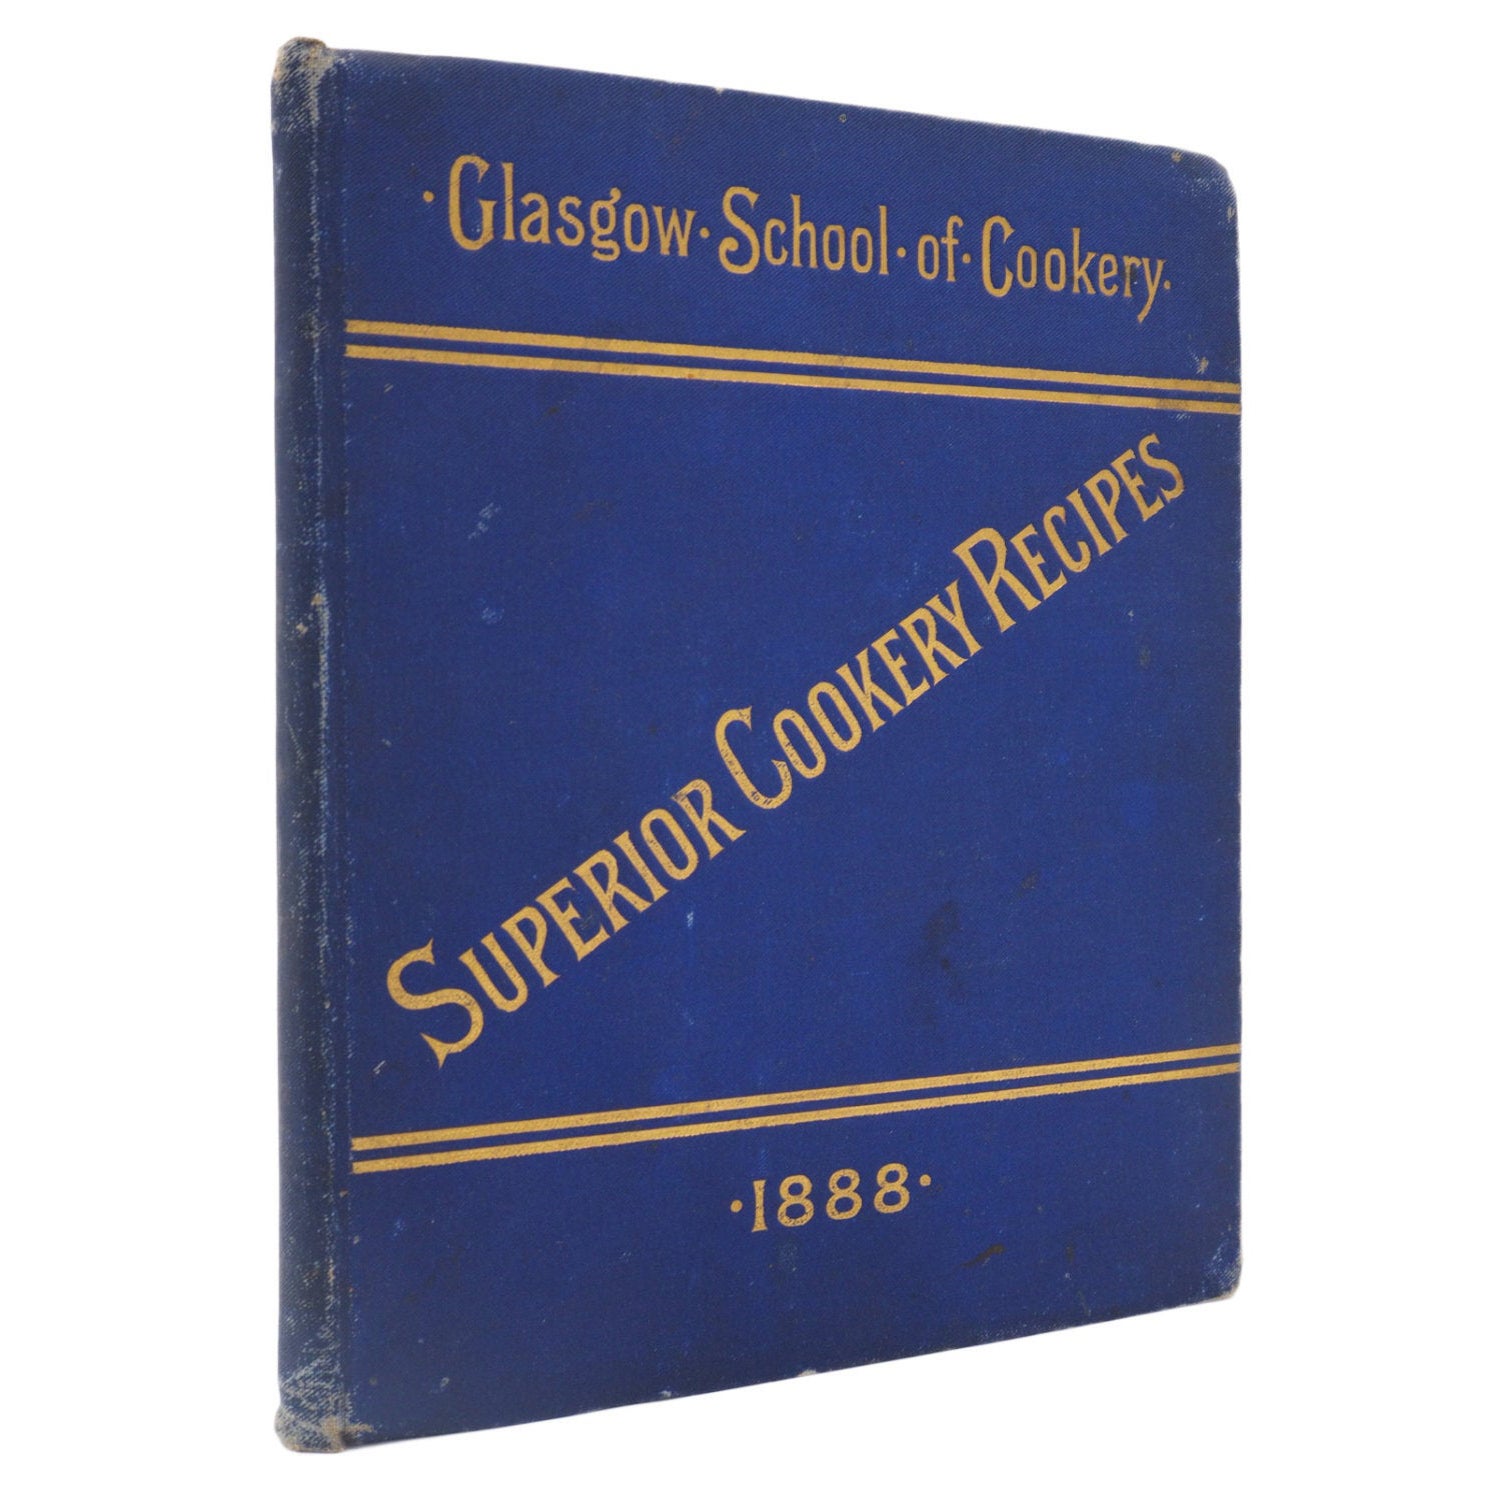 Vintage Culinary Charm: Recipes Published in 1888 by Glasgow School of Cookery